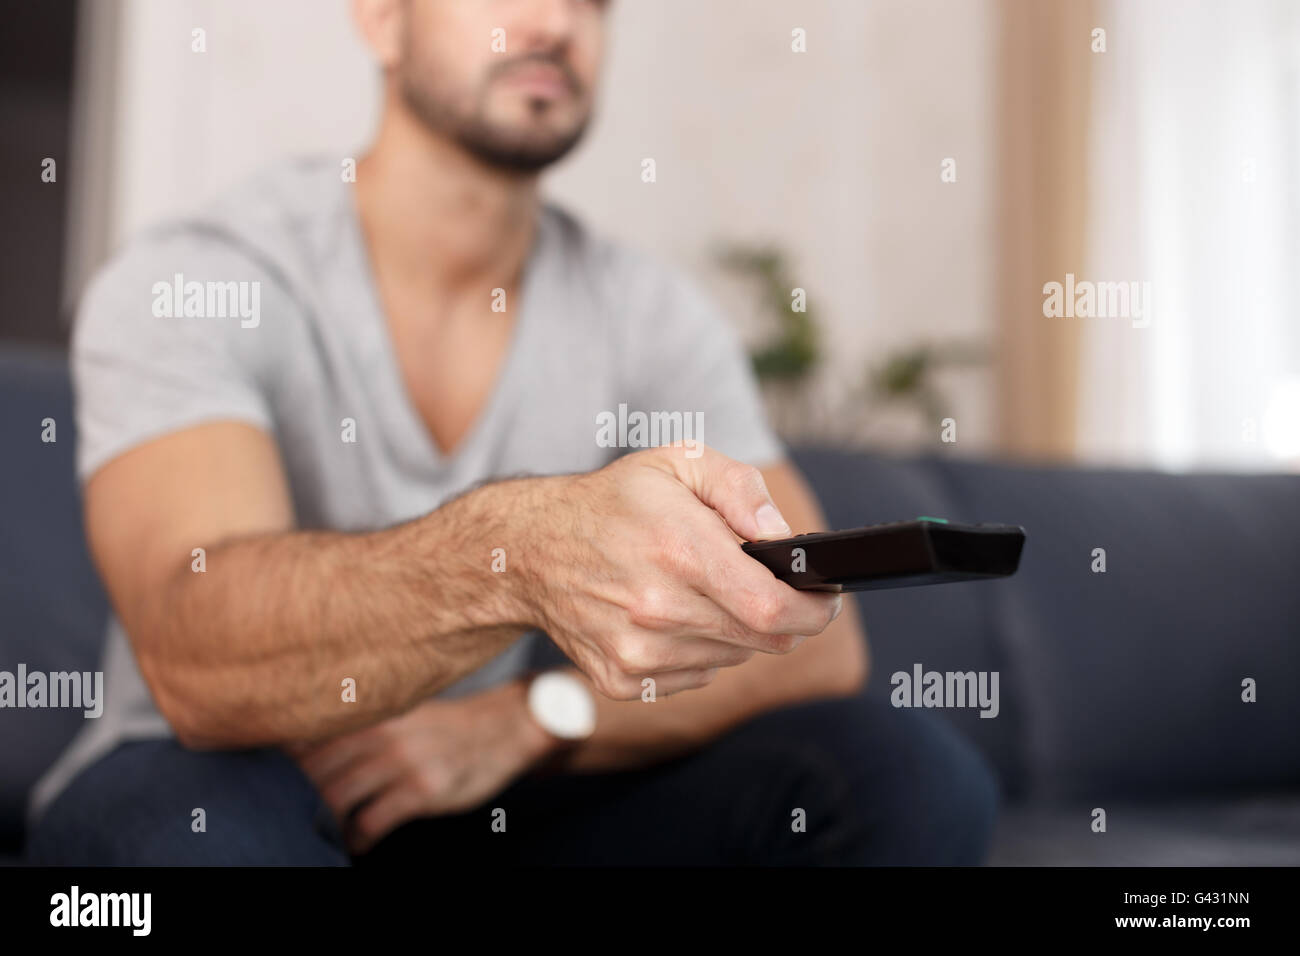 Man chaning TV channel by remote control at home Stock Photo